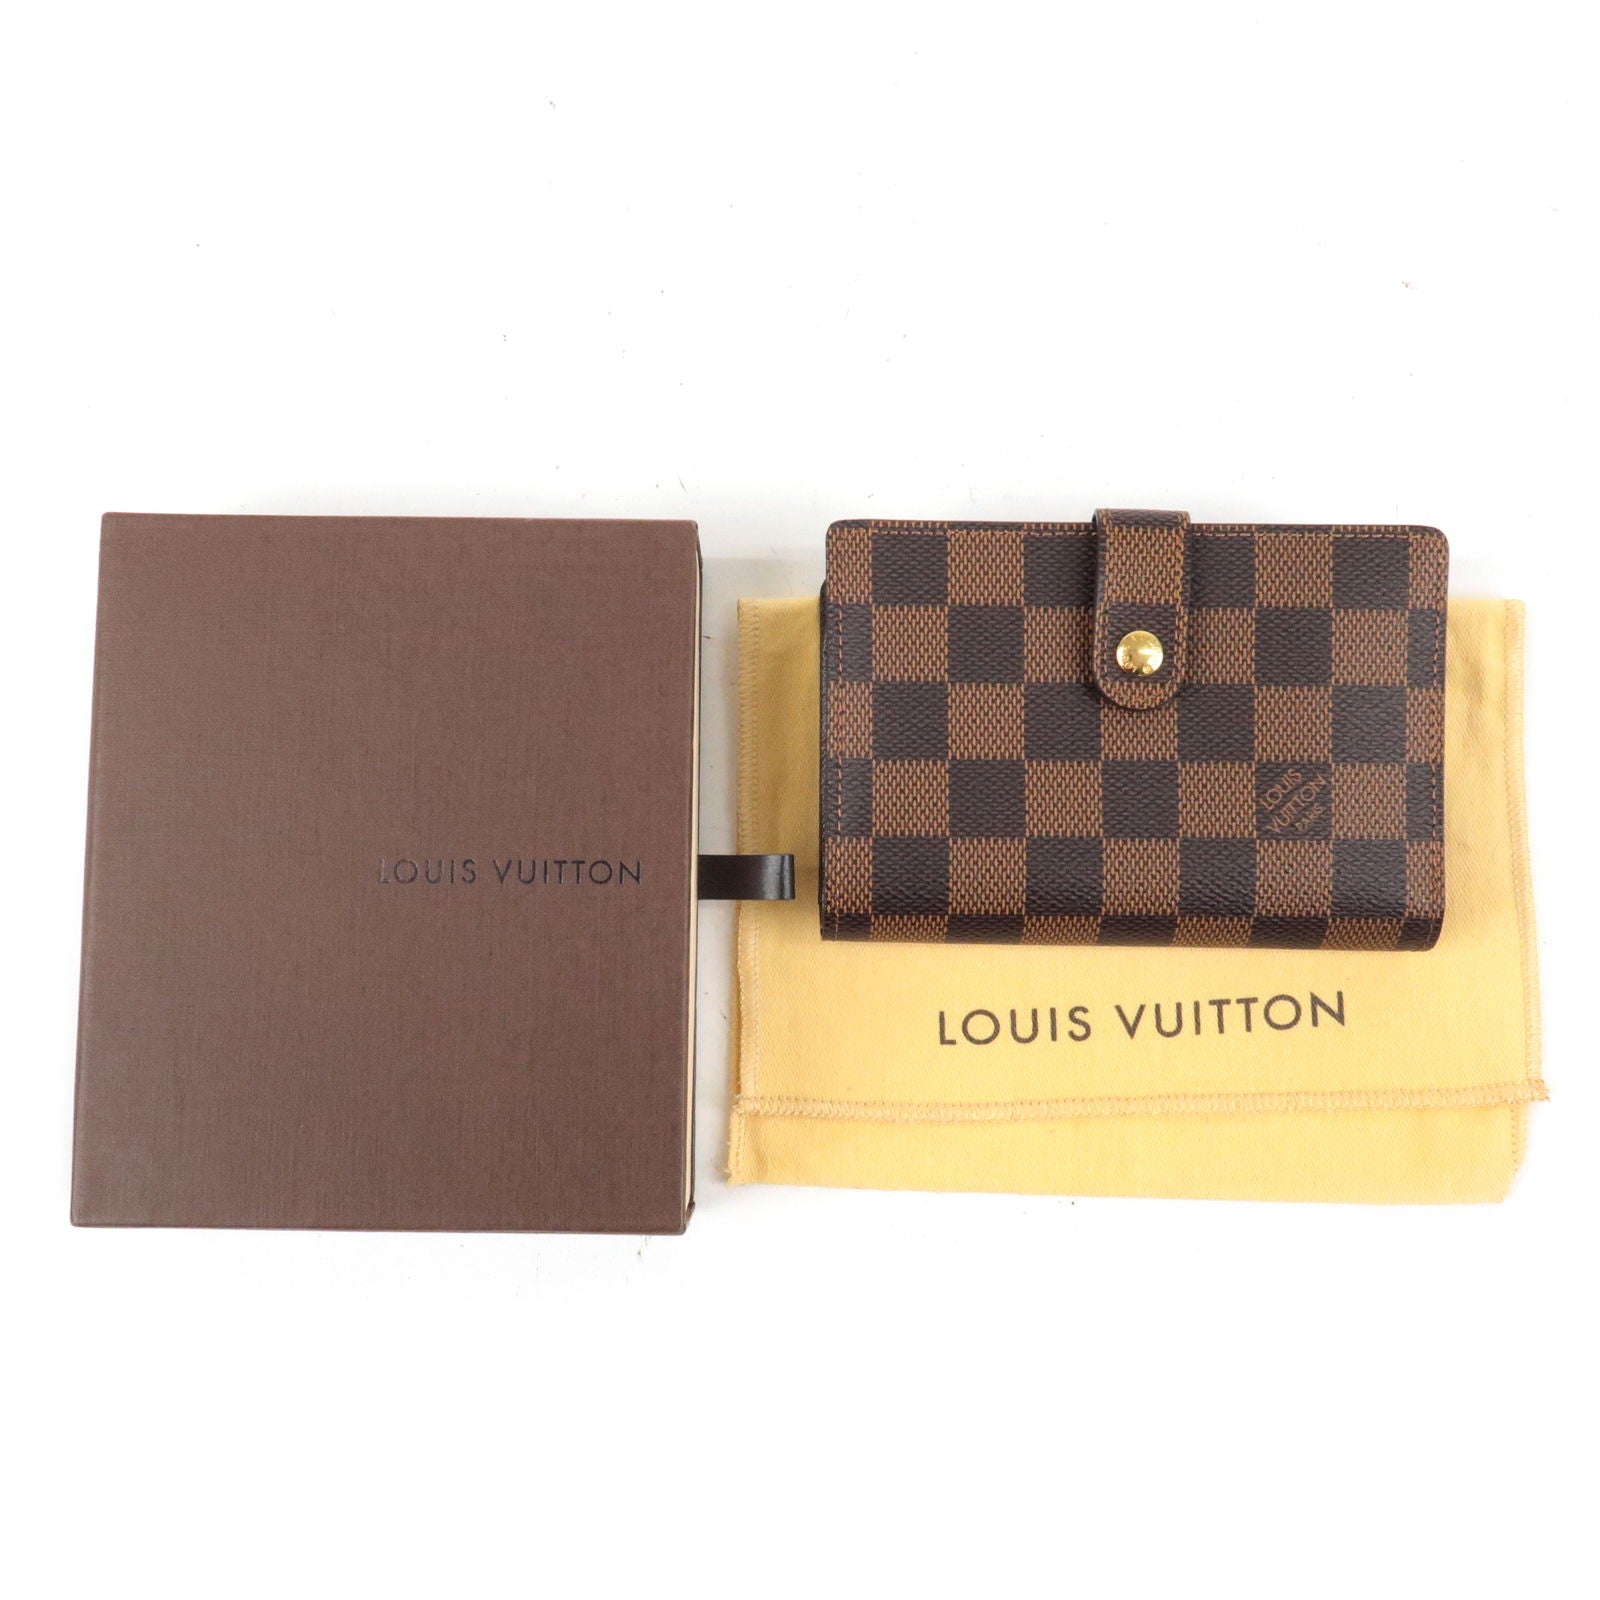 Buy [Used] LOUIS VUITTON Portefeuille Sistina Folio Long Wallet Damier  Ebene N61747 from Japan - Buy authentic Plus exclusive items from Japan